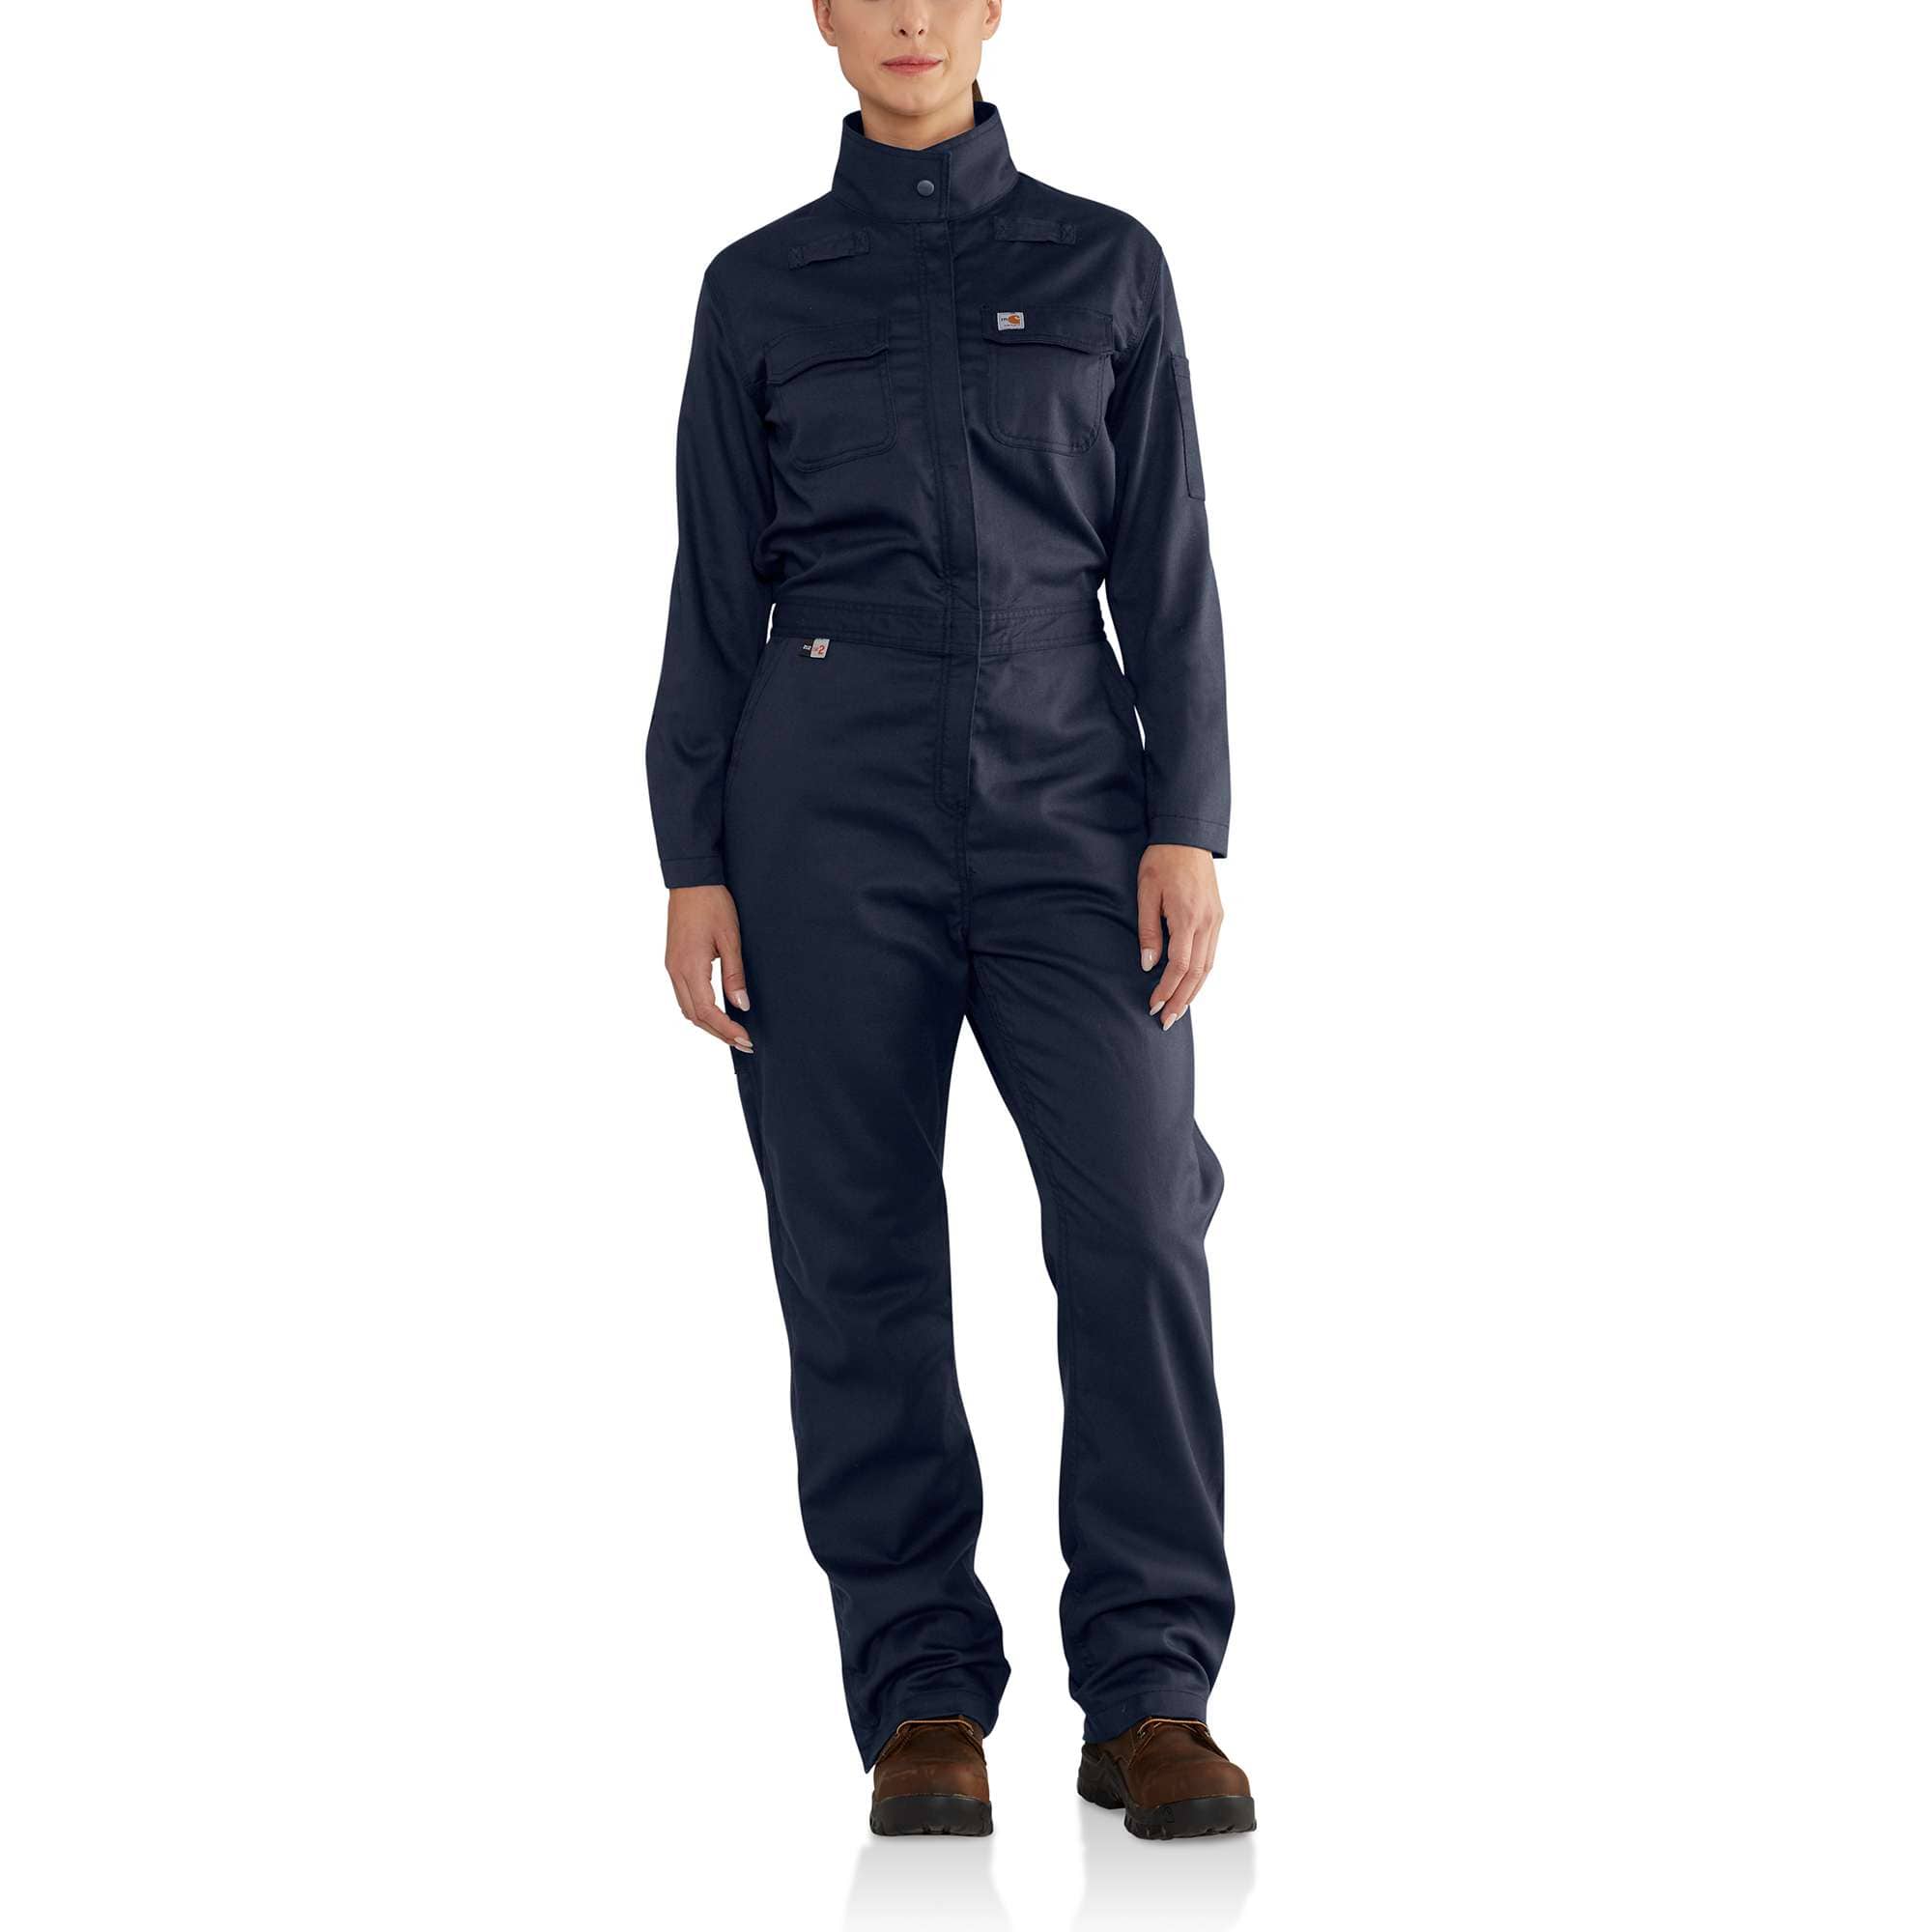  Carhartt womens Fr Force Fitted Midweight Utility